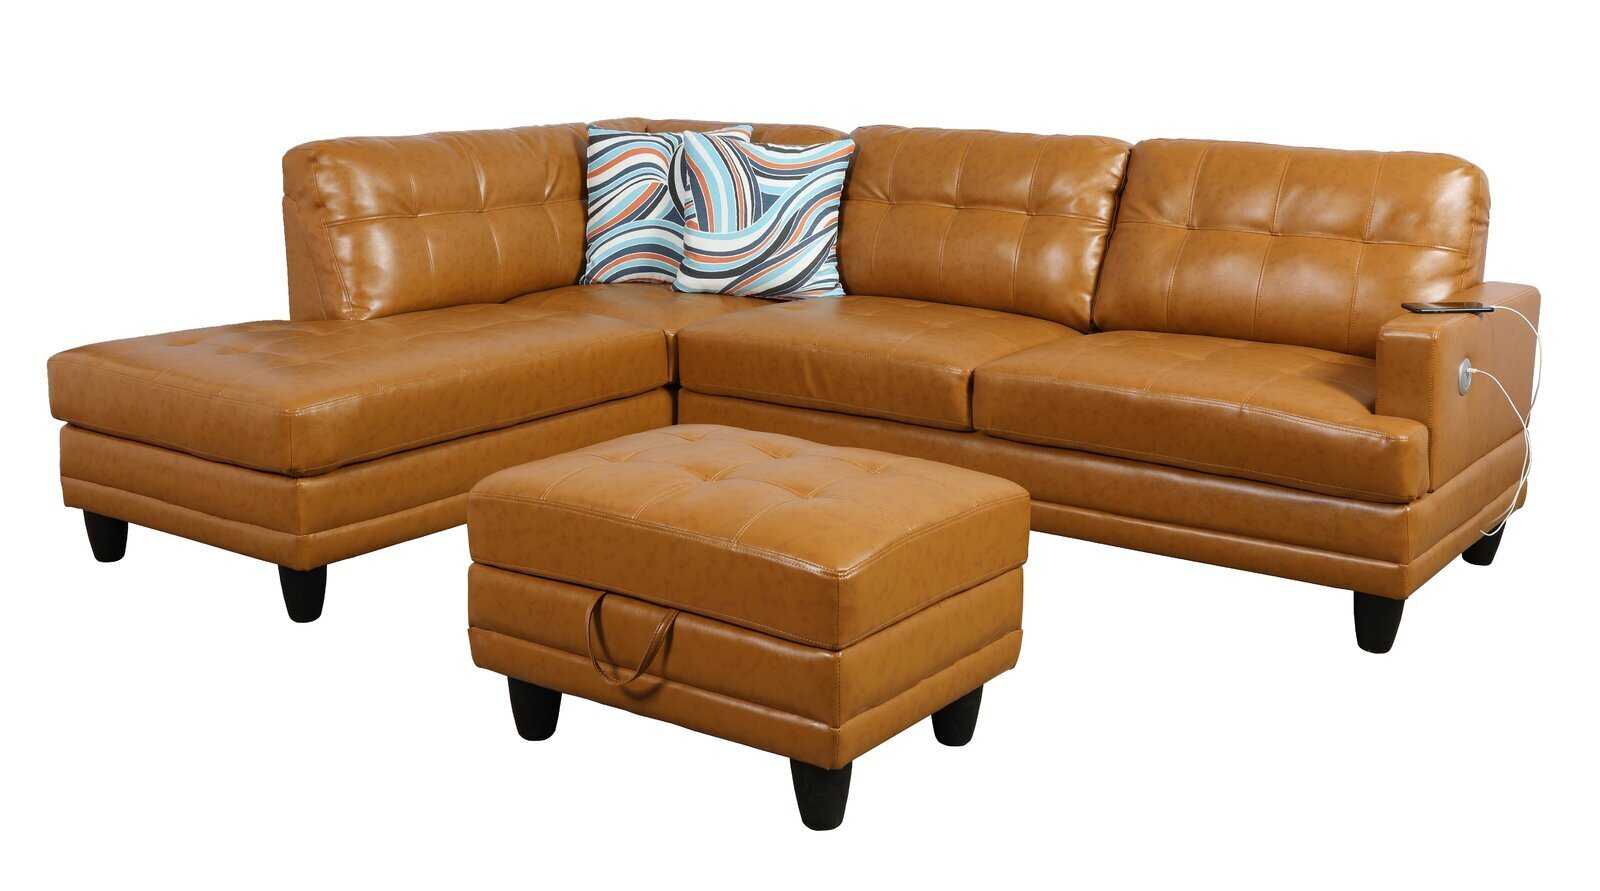 96” Wide Faux leather Corner Sectional With Ottoman